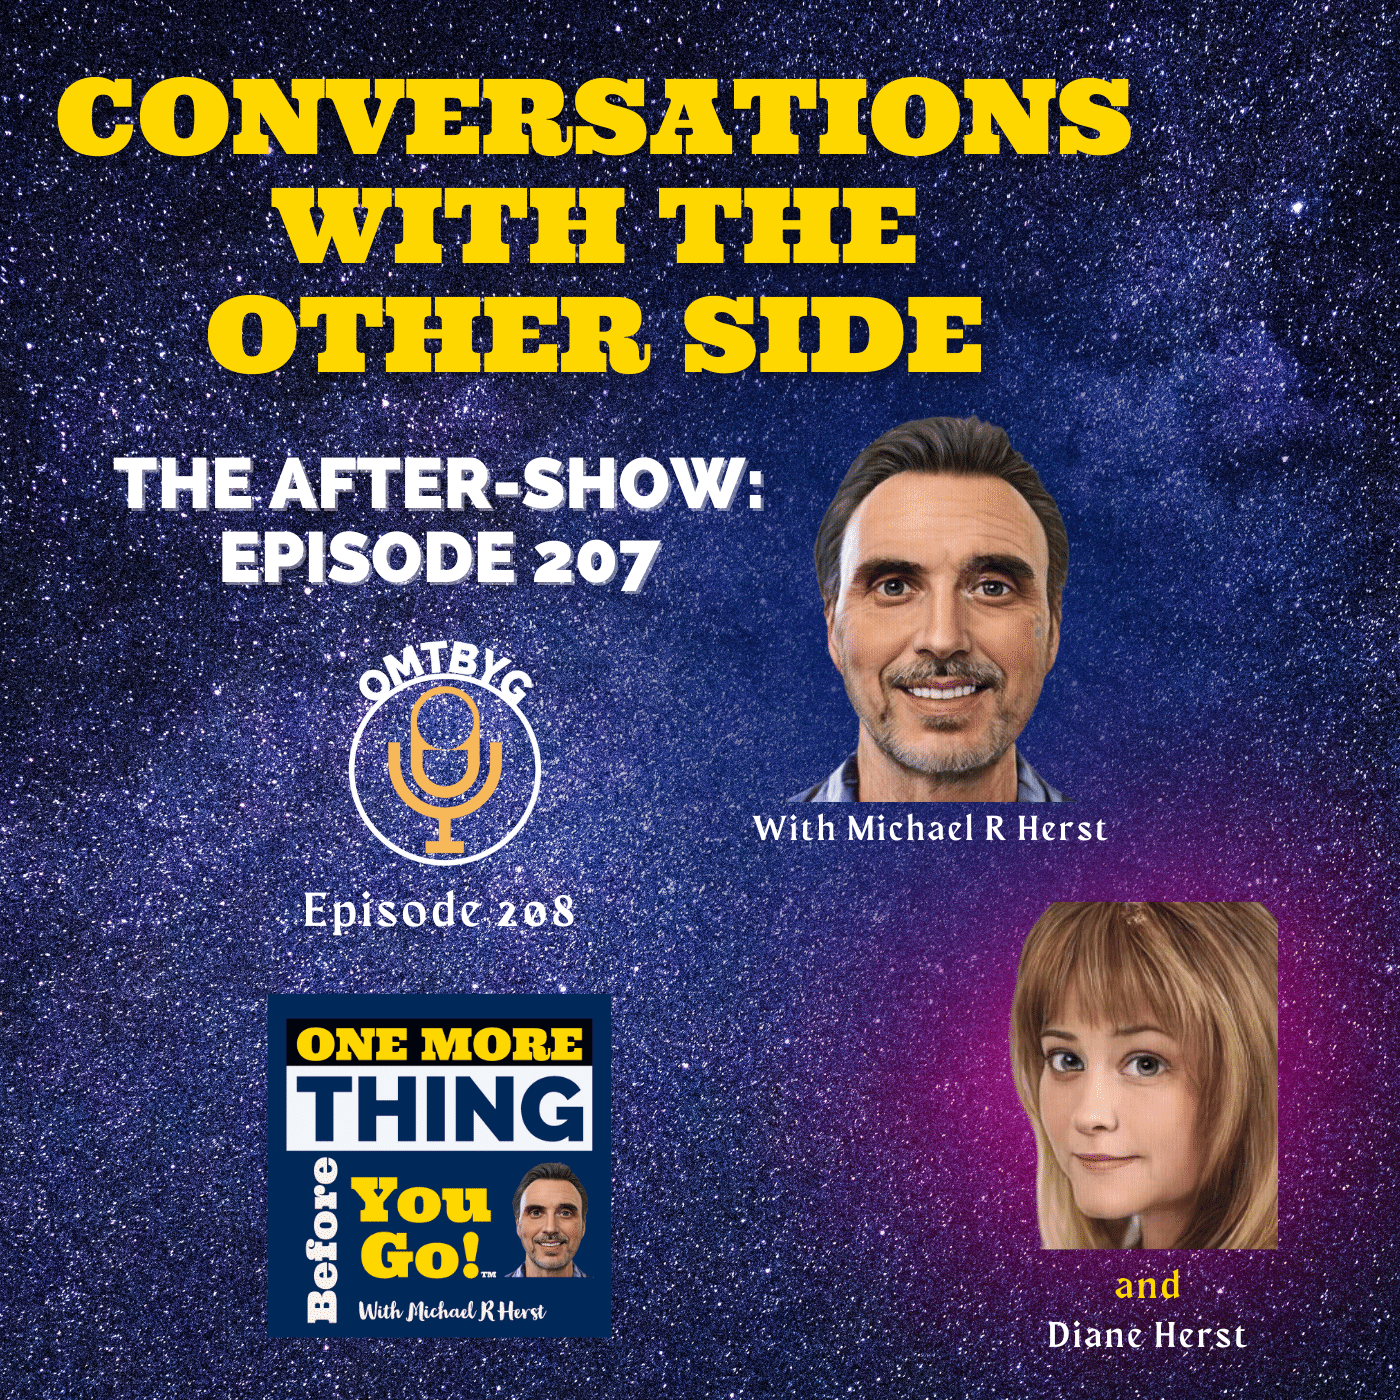 Conversations With the Other Side Ep 207 - The Sunday After-Show Image